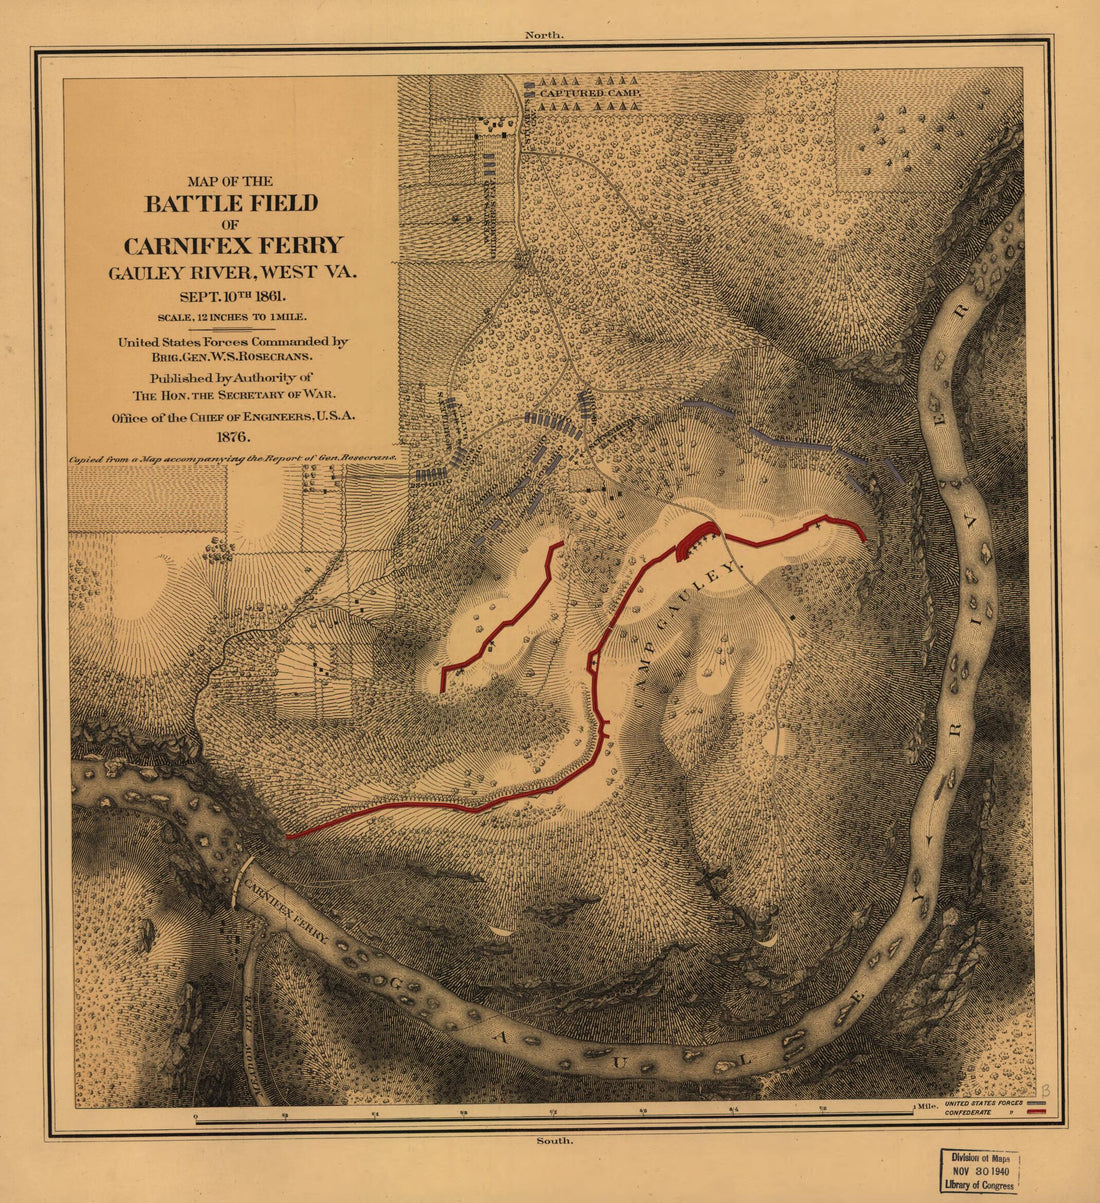 This old map of Map of the Battle Field of Carnifex Ferry, Gauley River, West Va., Sept. 10th 1861. United States Forces Commanded by Brig. Gen. W. S. Rosecrans from 1876 was created by  United States. Army. Corps of Engineers in 1876